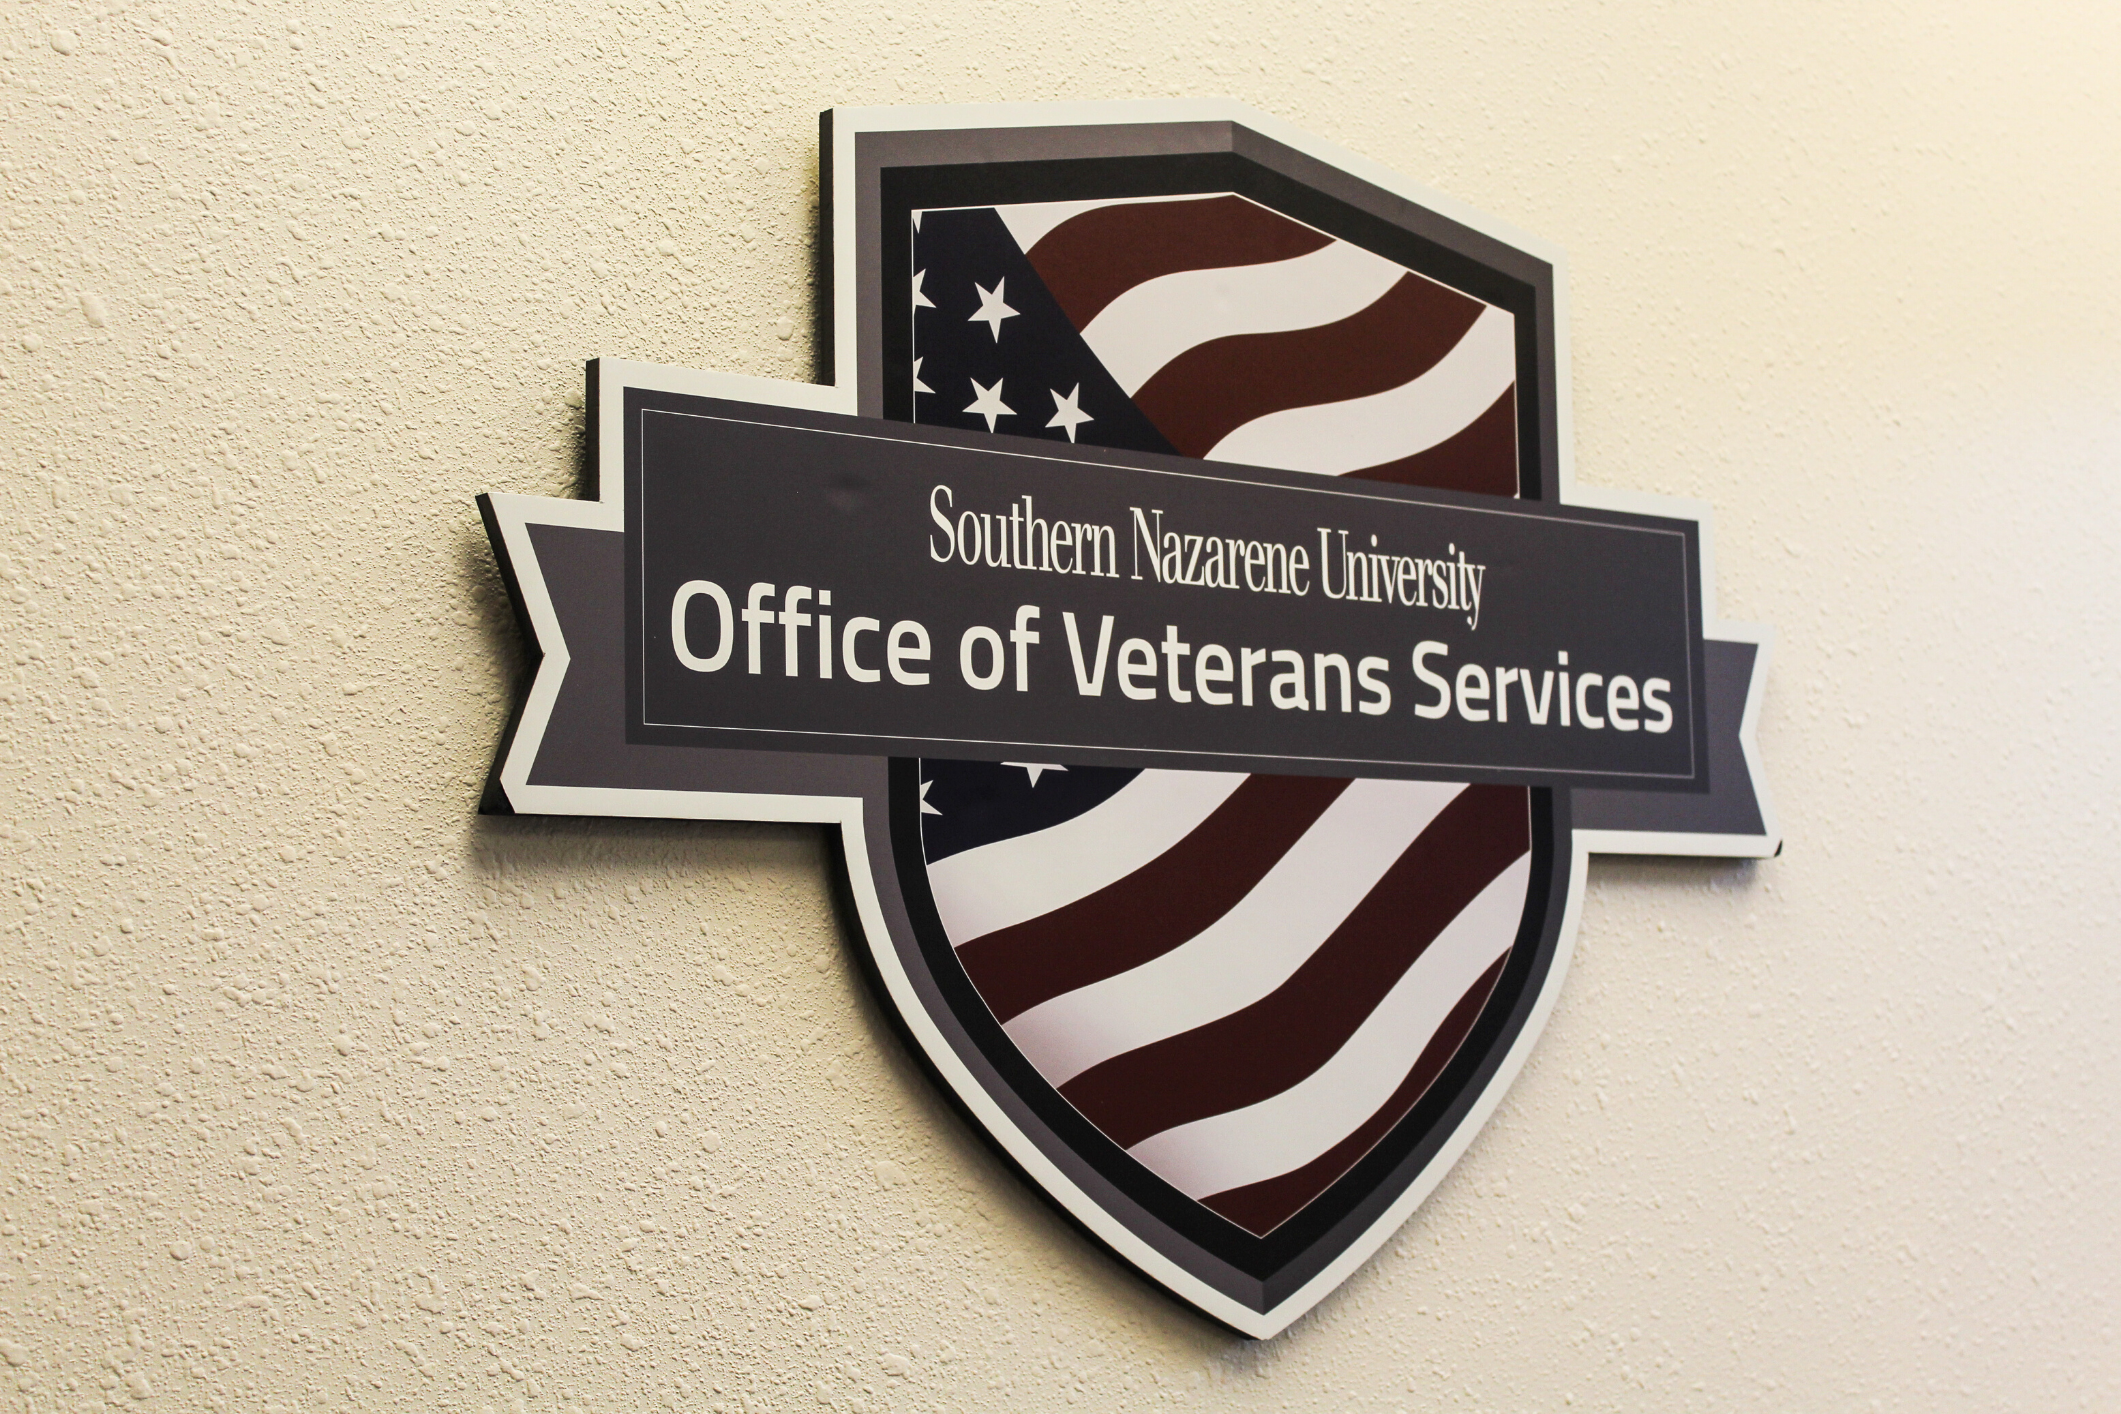 New SNU VETS Center Director to Empower Veterans and Families